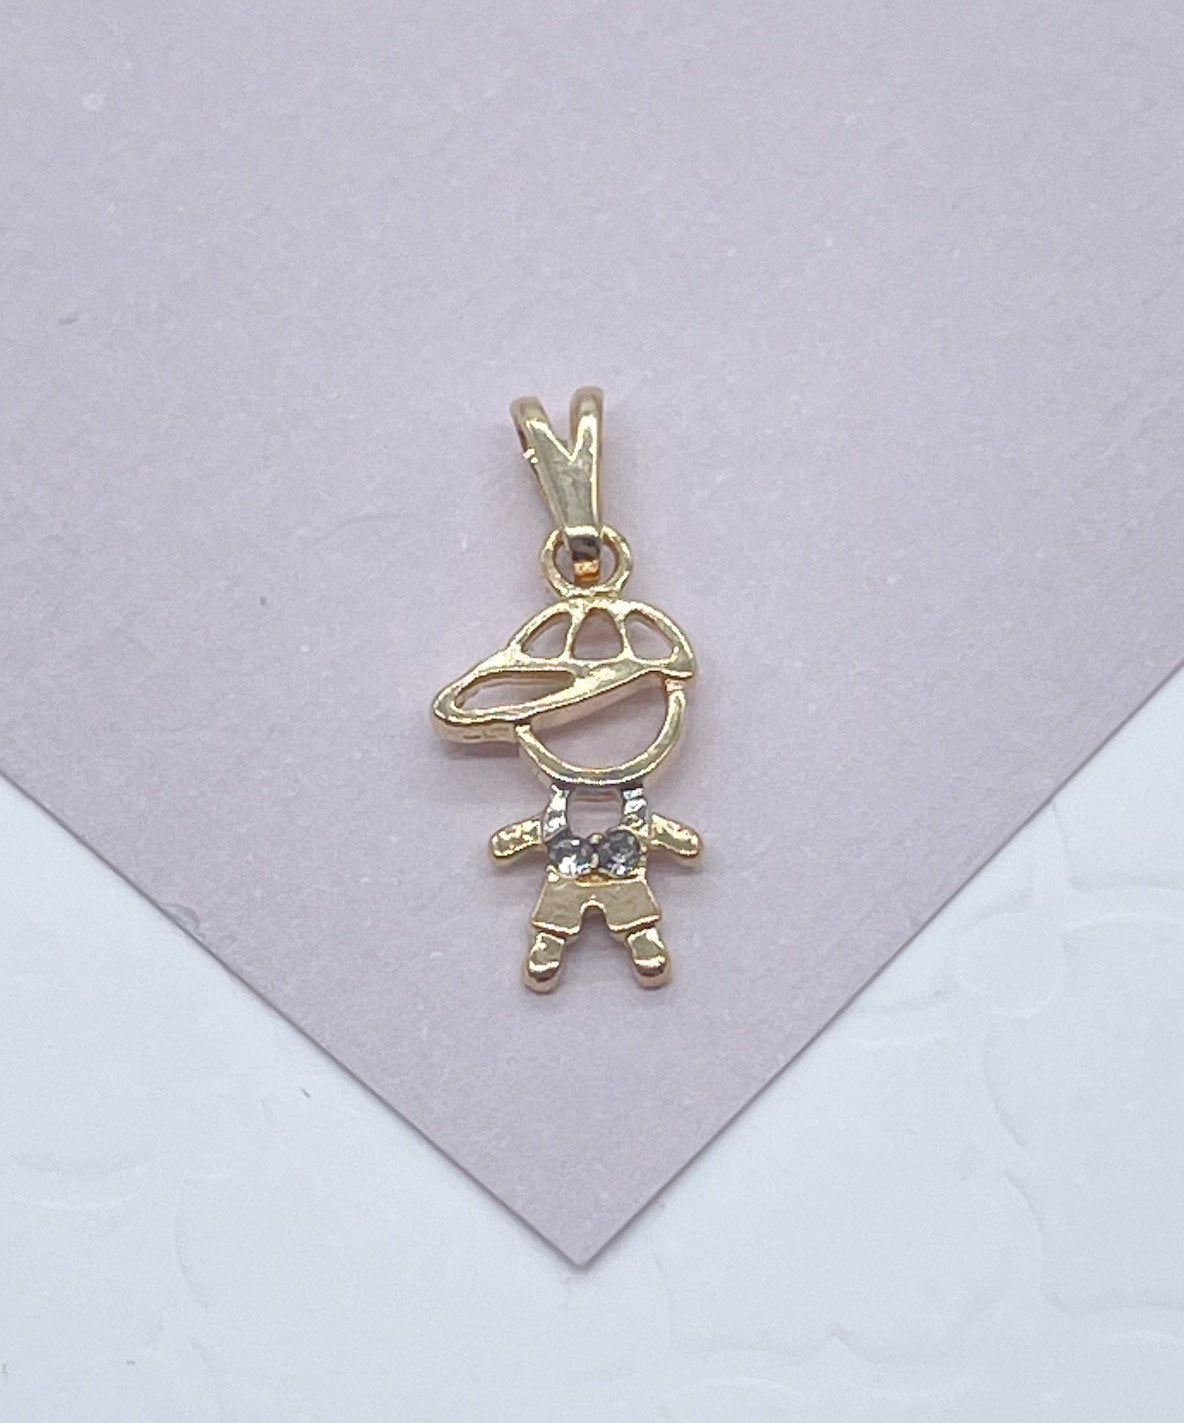 18k Gold Layered Kids Charms Boy in a Hat or Girl Featuring Cubic Zirconia For